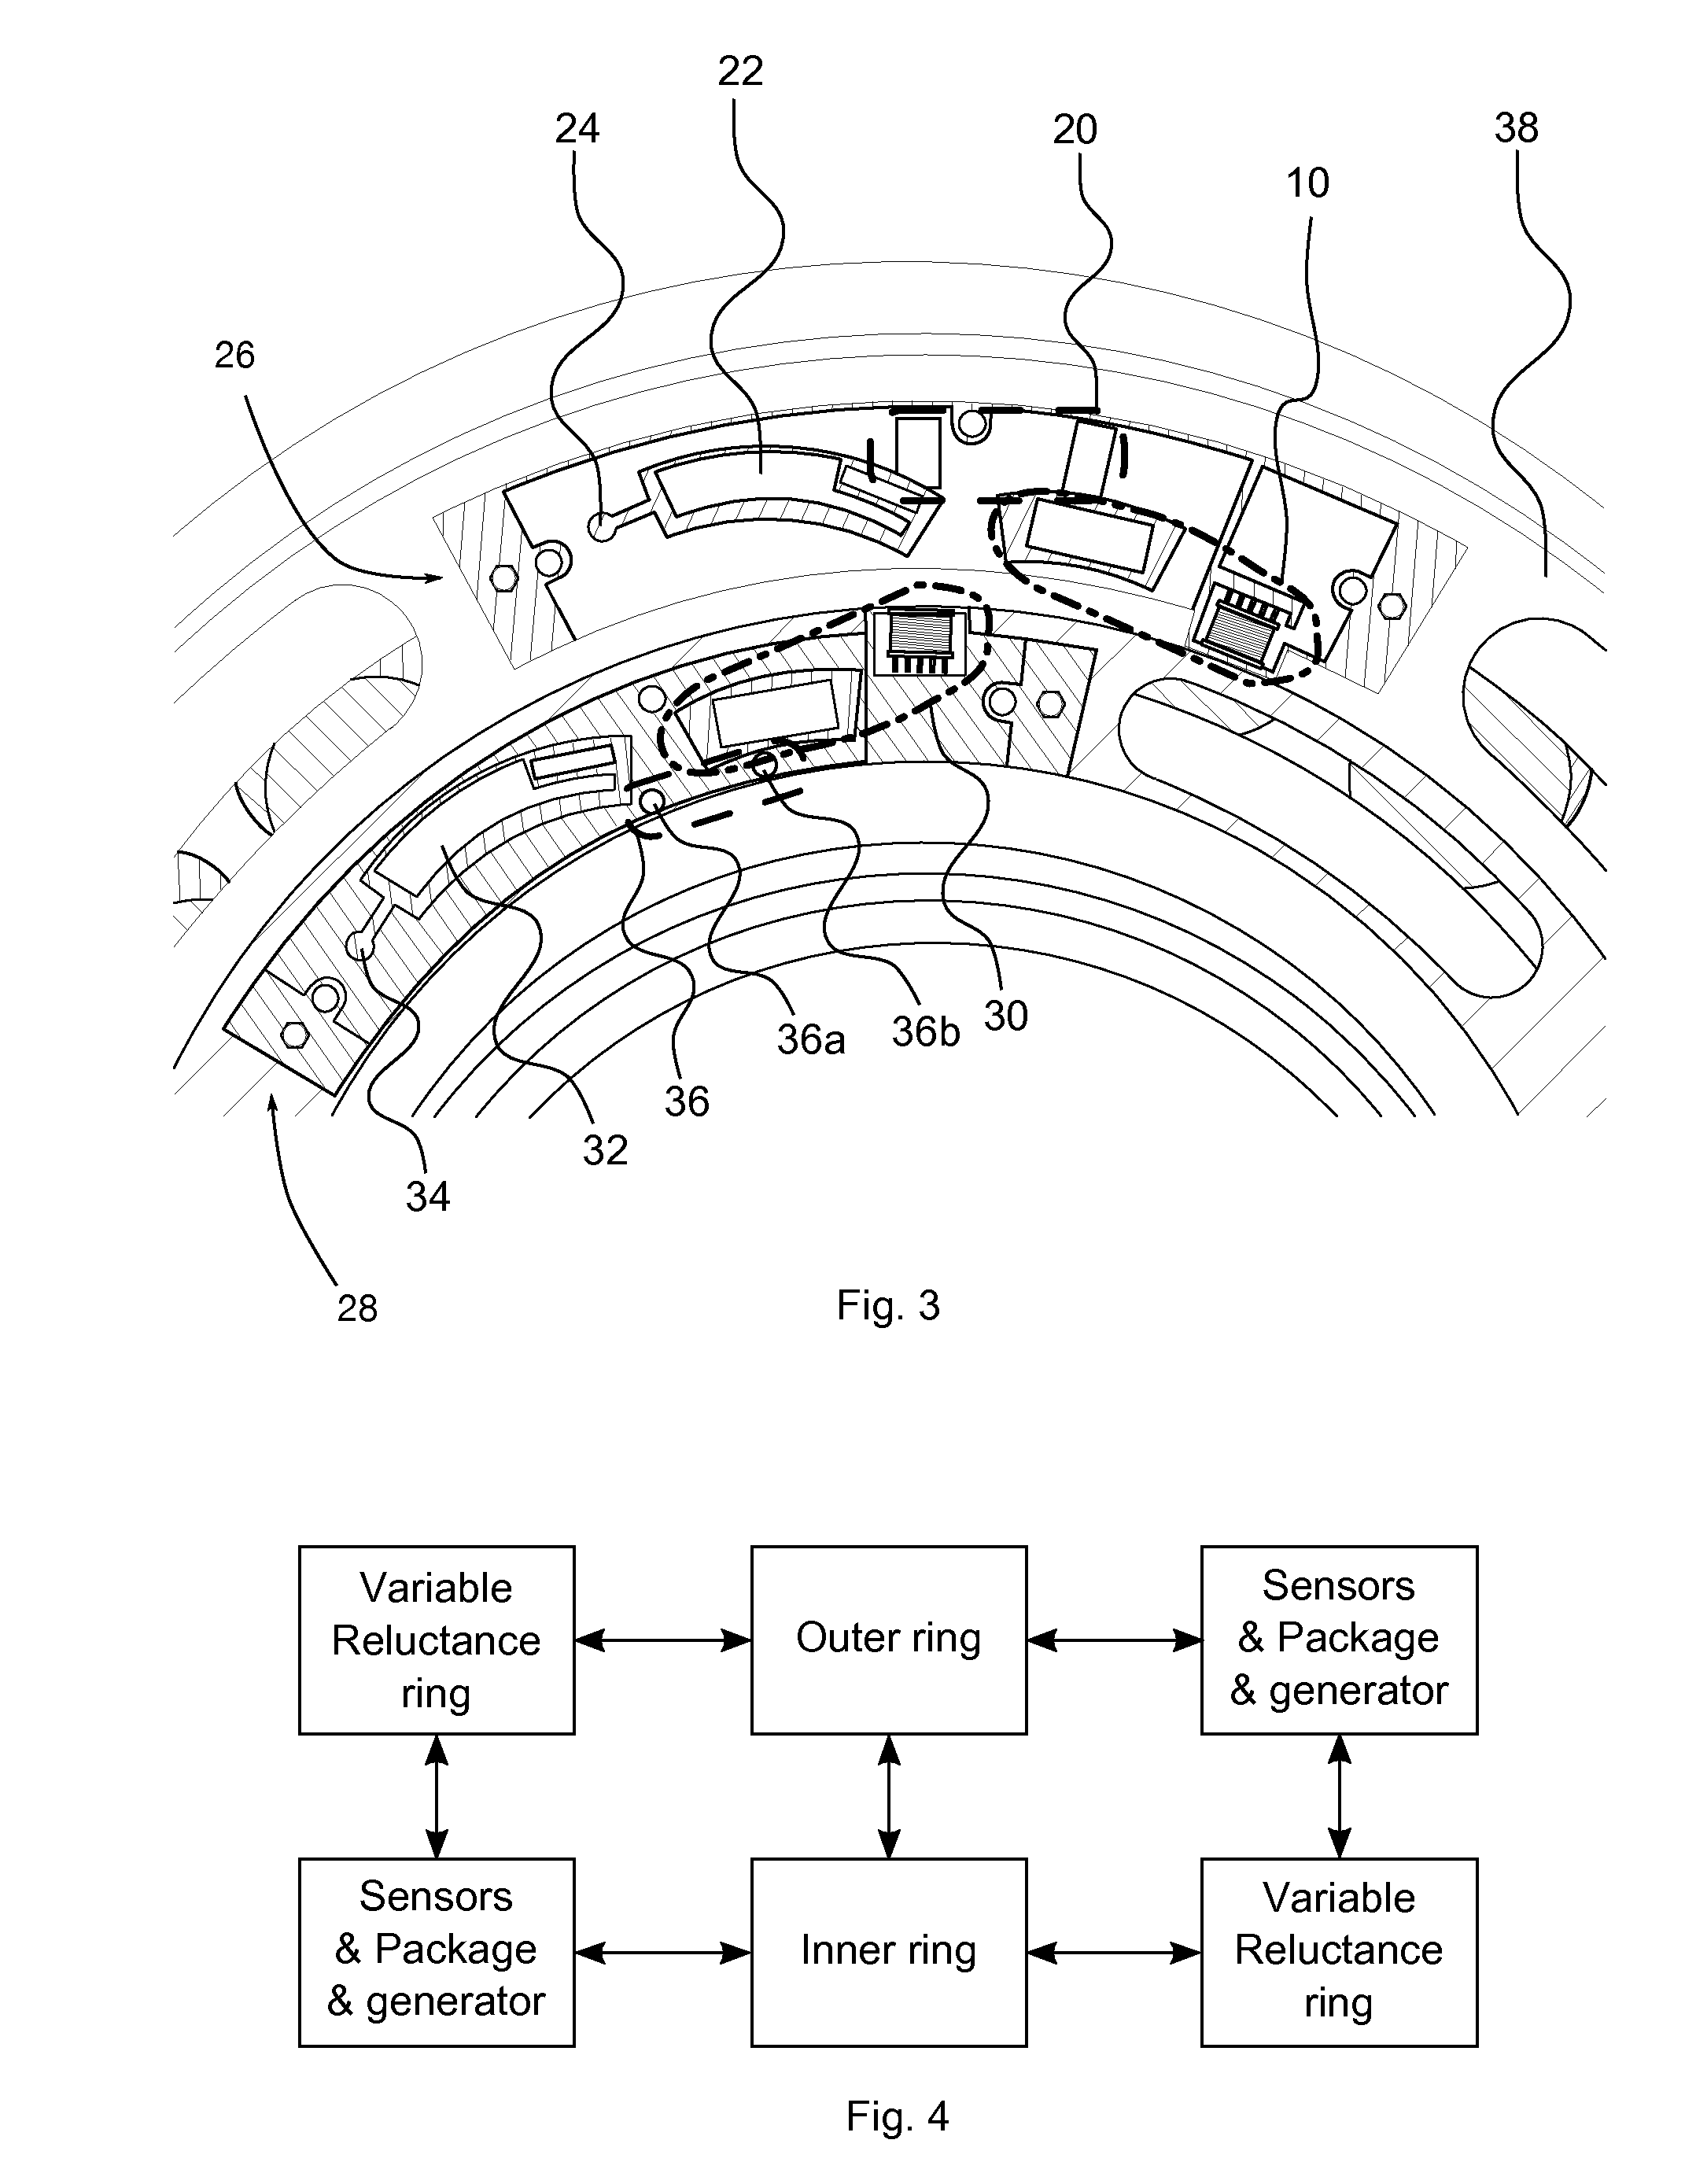 Module for determining an operating characteristic of a bearing